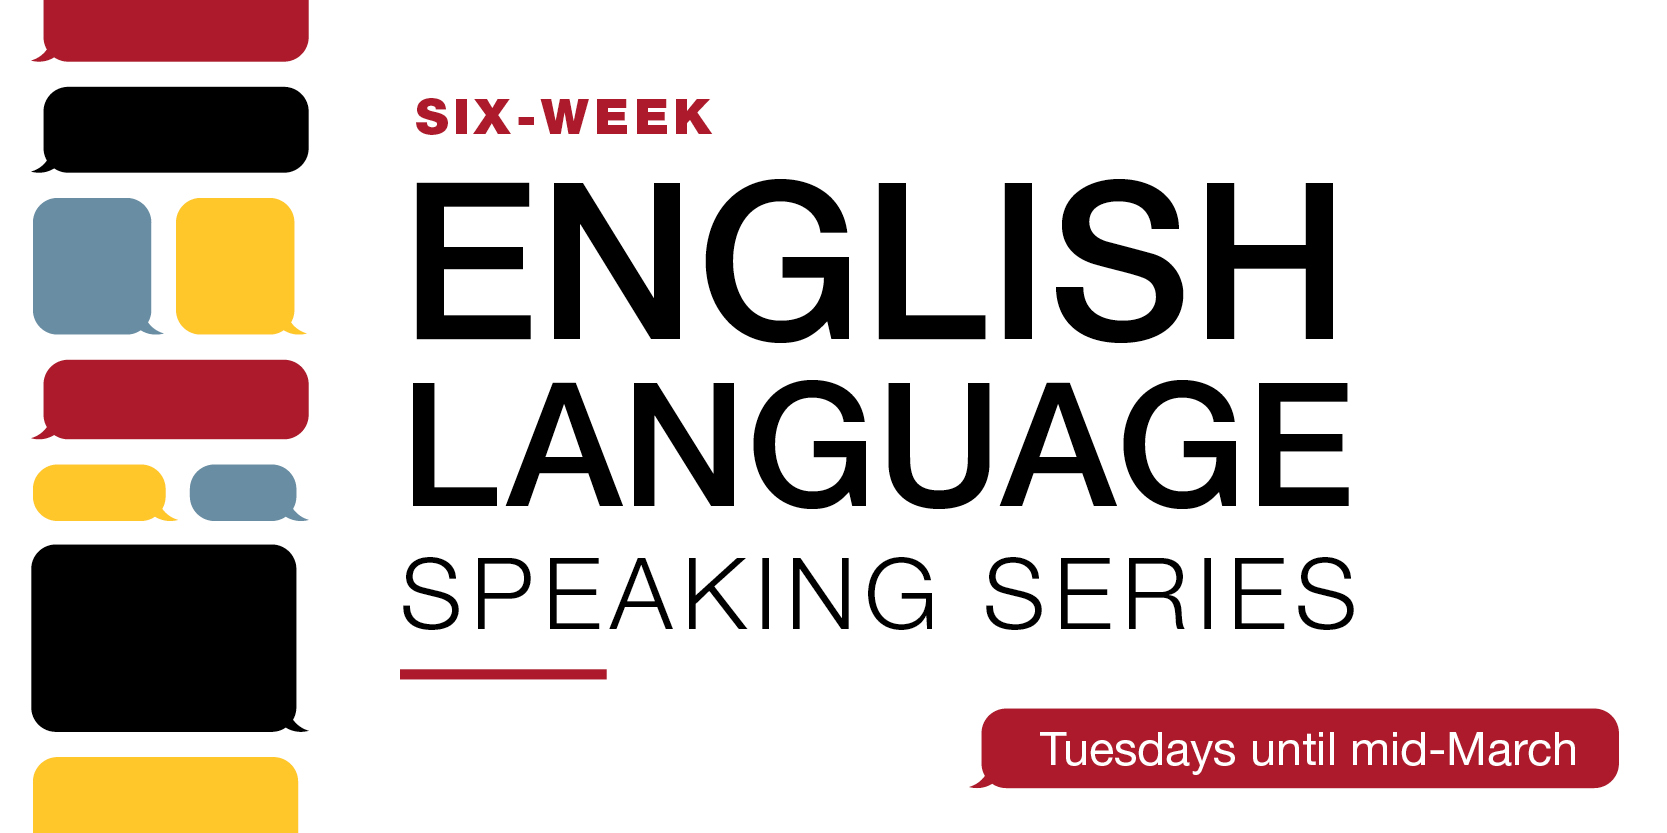 A collection of yellow, red, black, and blue speech bubbles are on the left hand side of the graphic. Text on the graphic reads six-week English language speaking series, Tuesdays until mid-March.